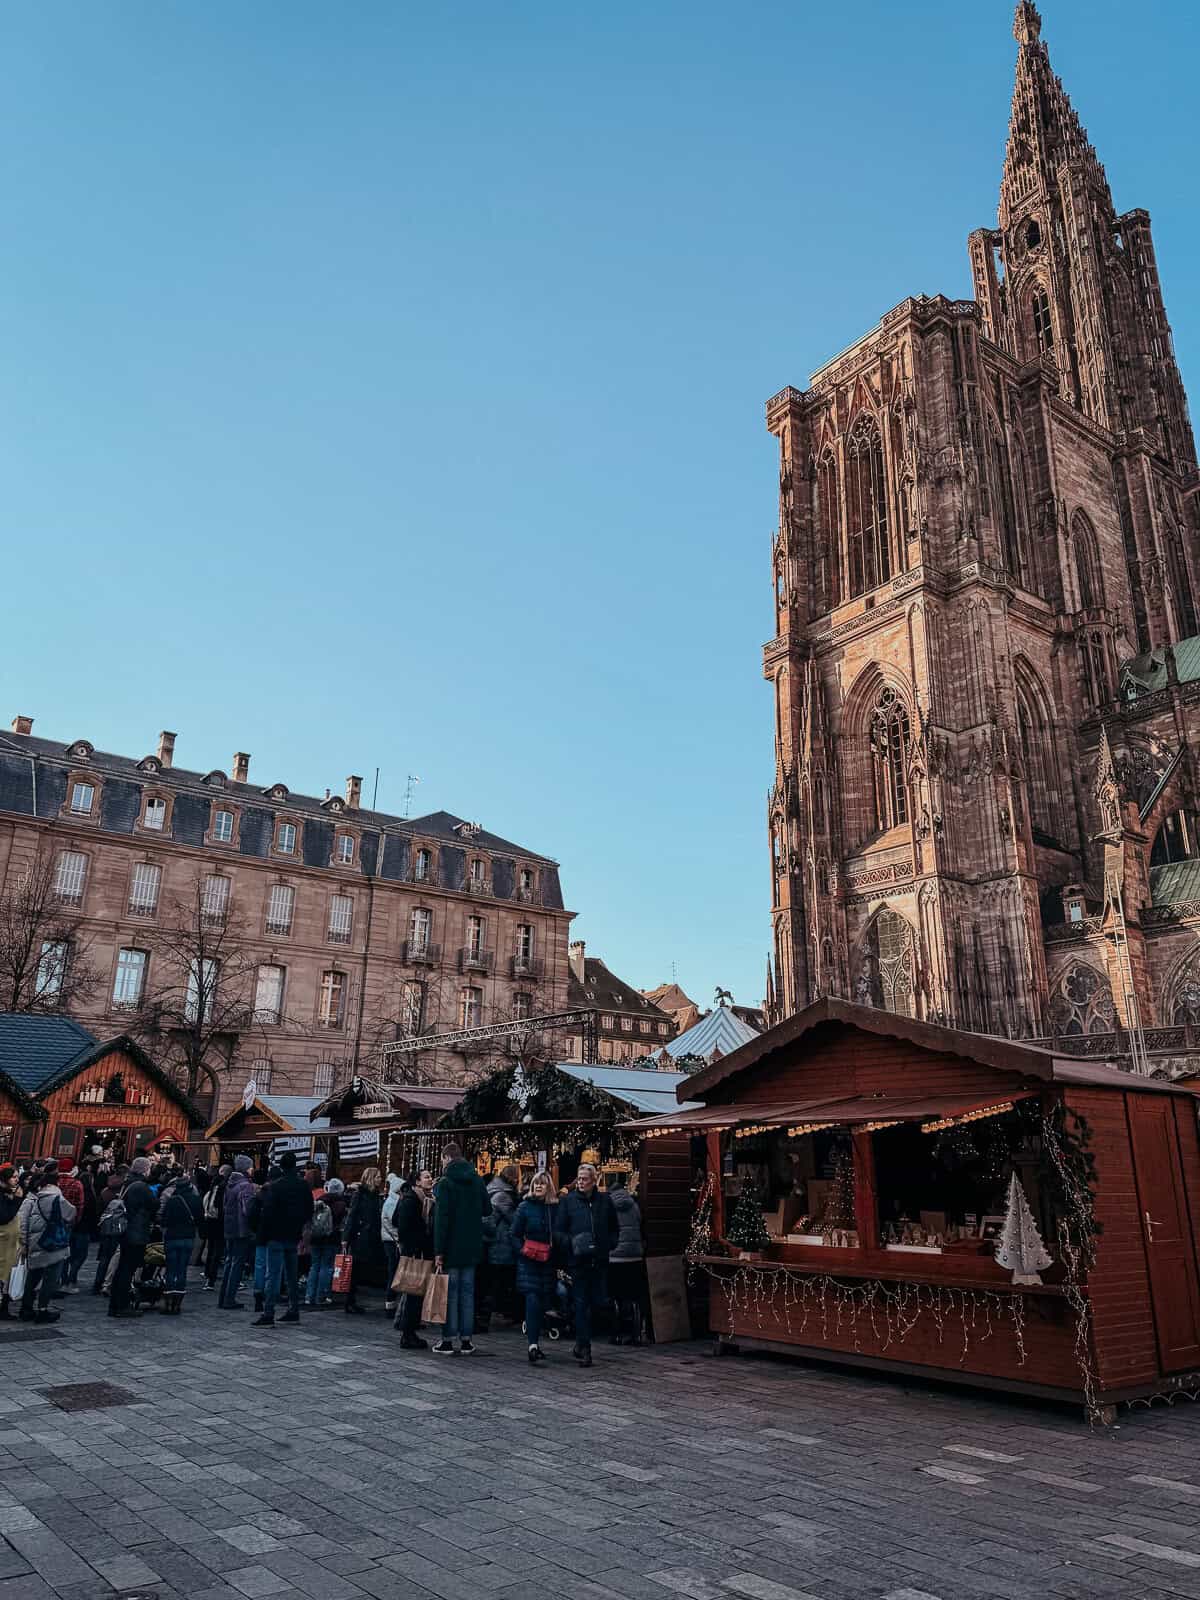 A close view of an elaborate Gothic cathedral next to a Christmas market, showcasing detailed architecture and festive market activity.